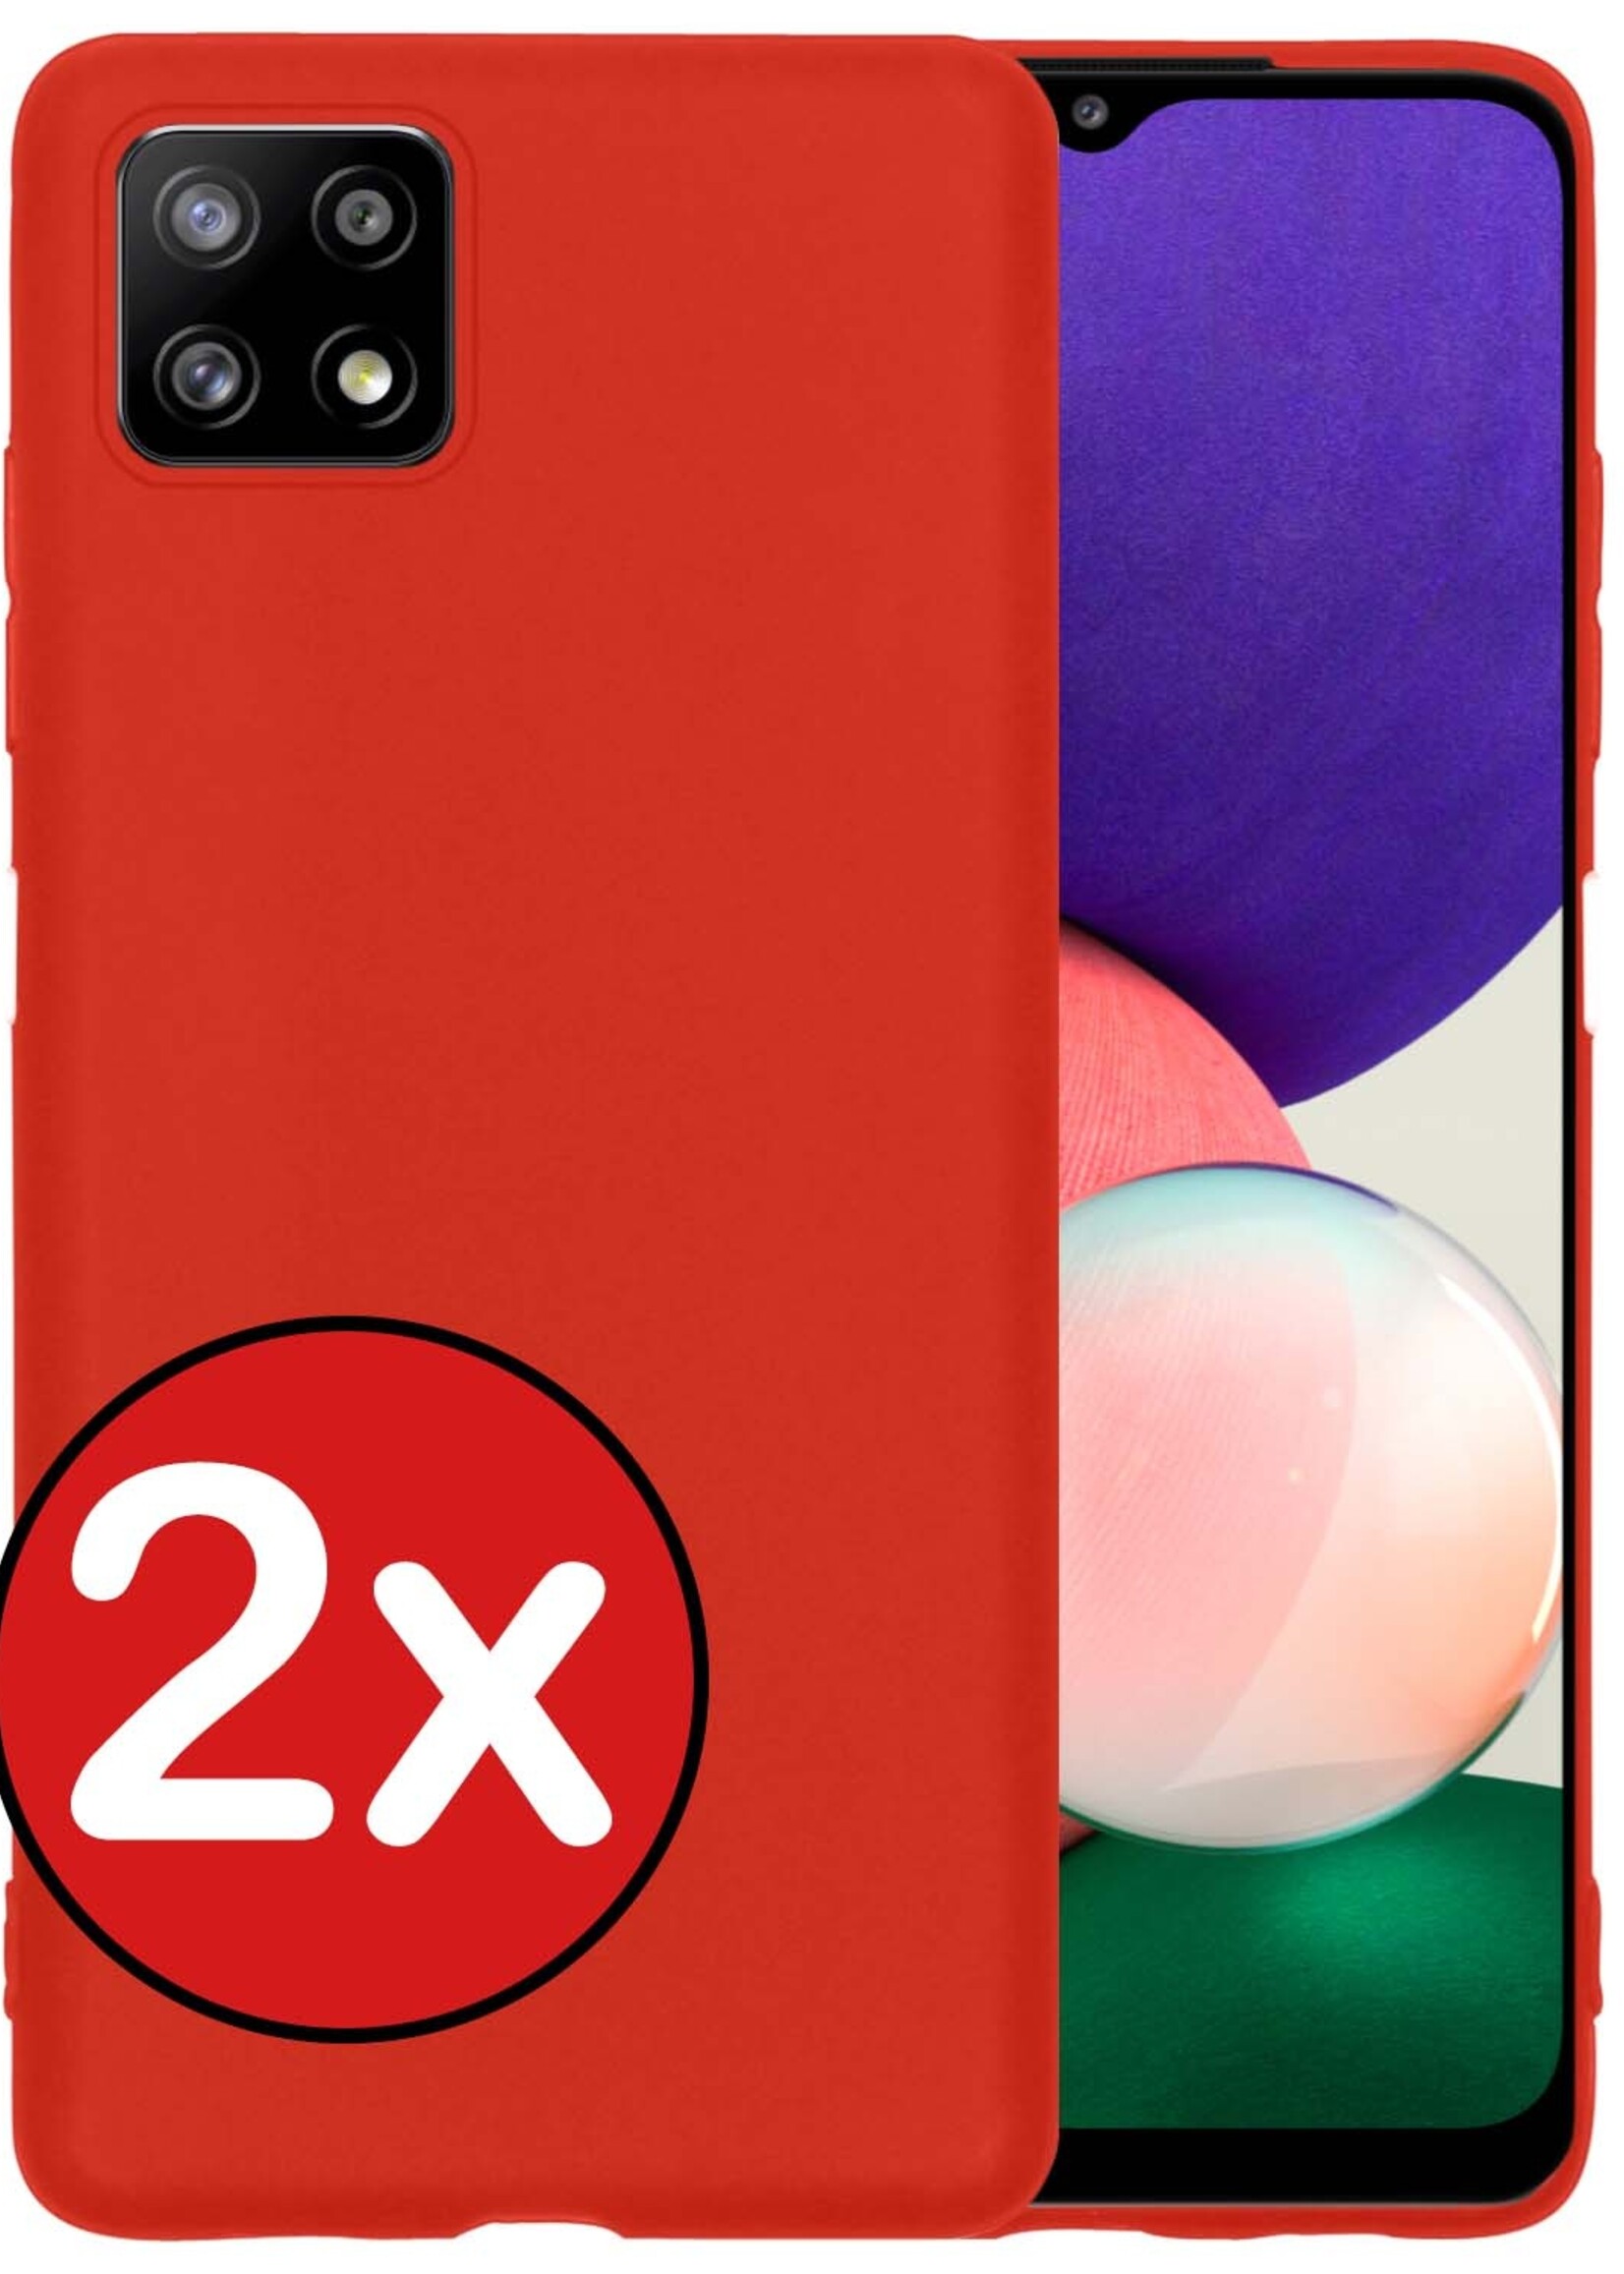 BTH Hoesje Geschikt voor Samsung A22 4G Hoesje Siliconen Case Hoes - Hoes Geschikt voor Samsung Galaxy A22 4G Hoes Cover Case - Rood - 2 PACK